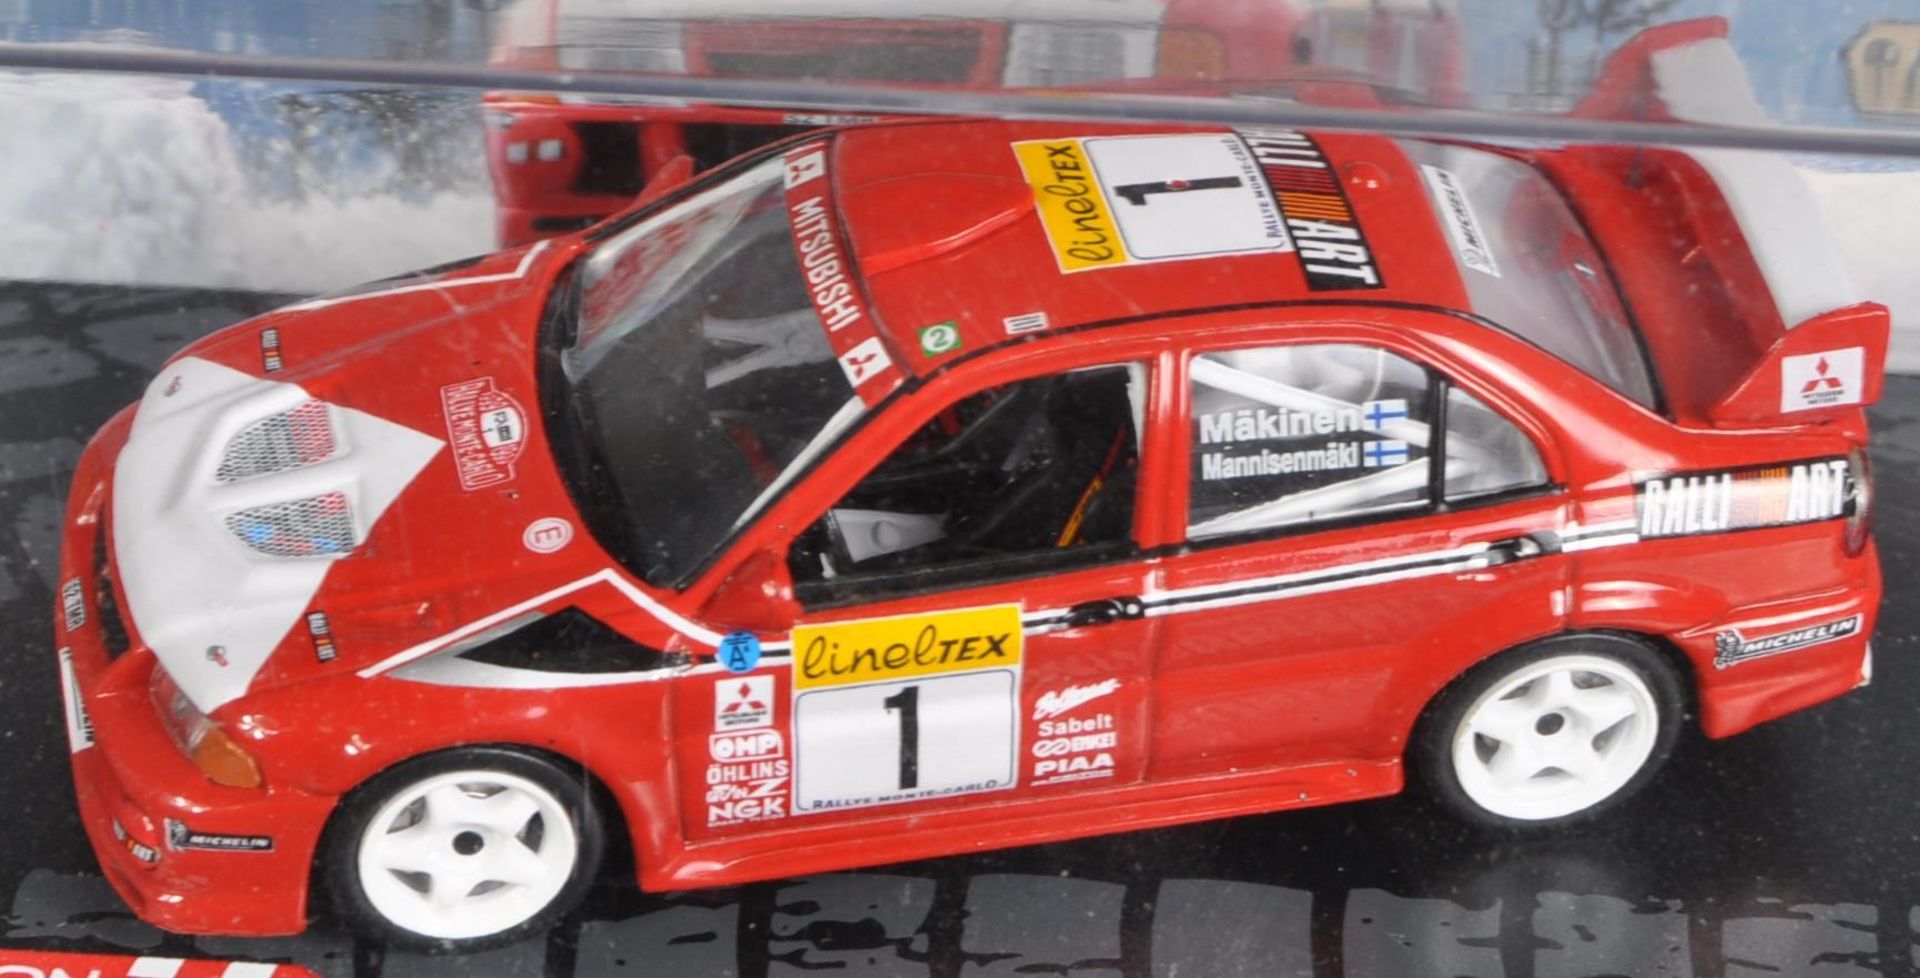 CHAMPION RALLY CARS - 1/43 SCALE PRECISION DIECAST MODELS - Image 2 of 7